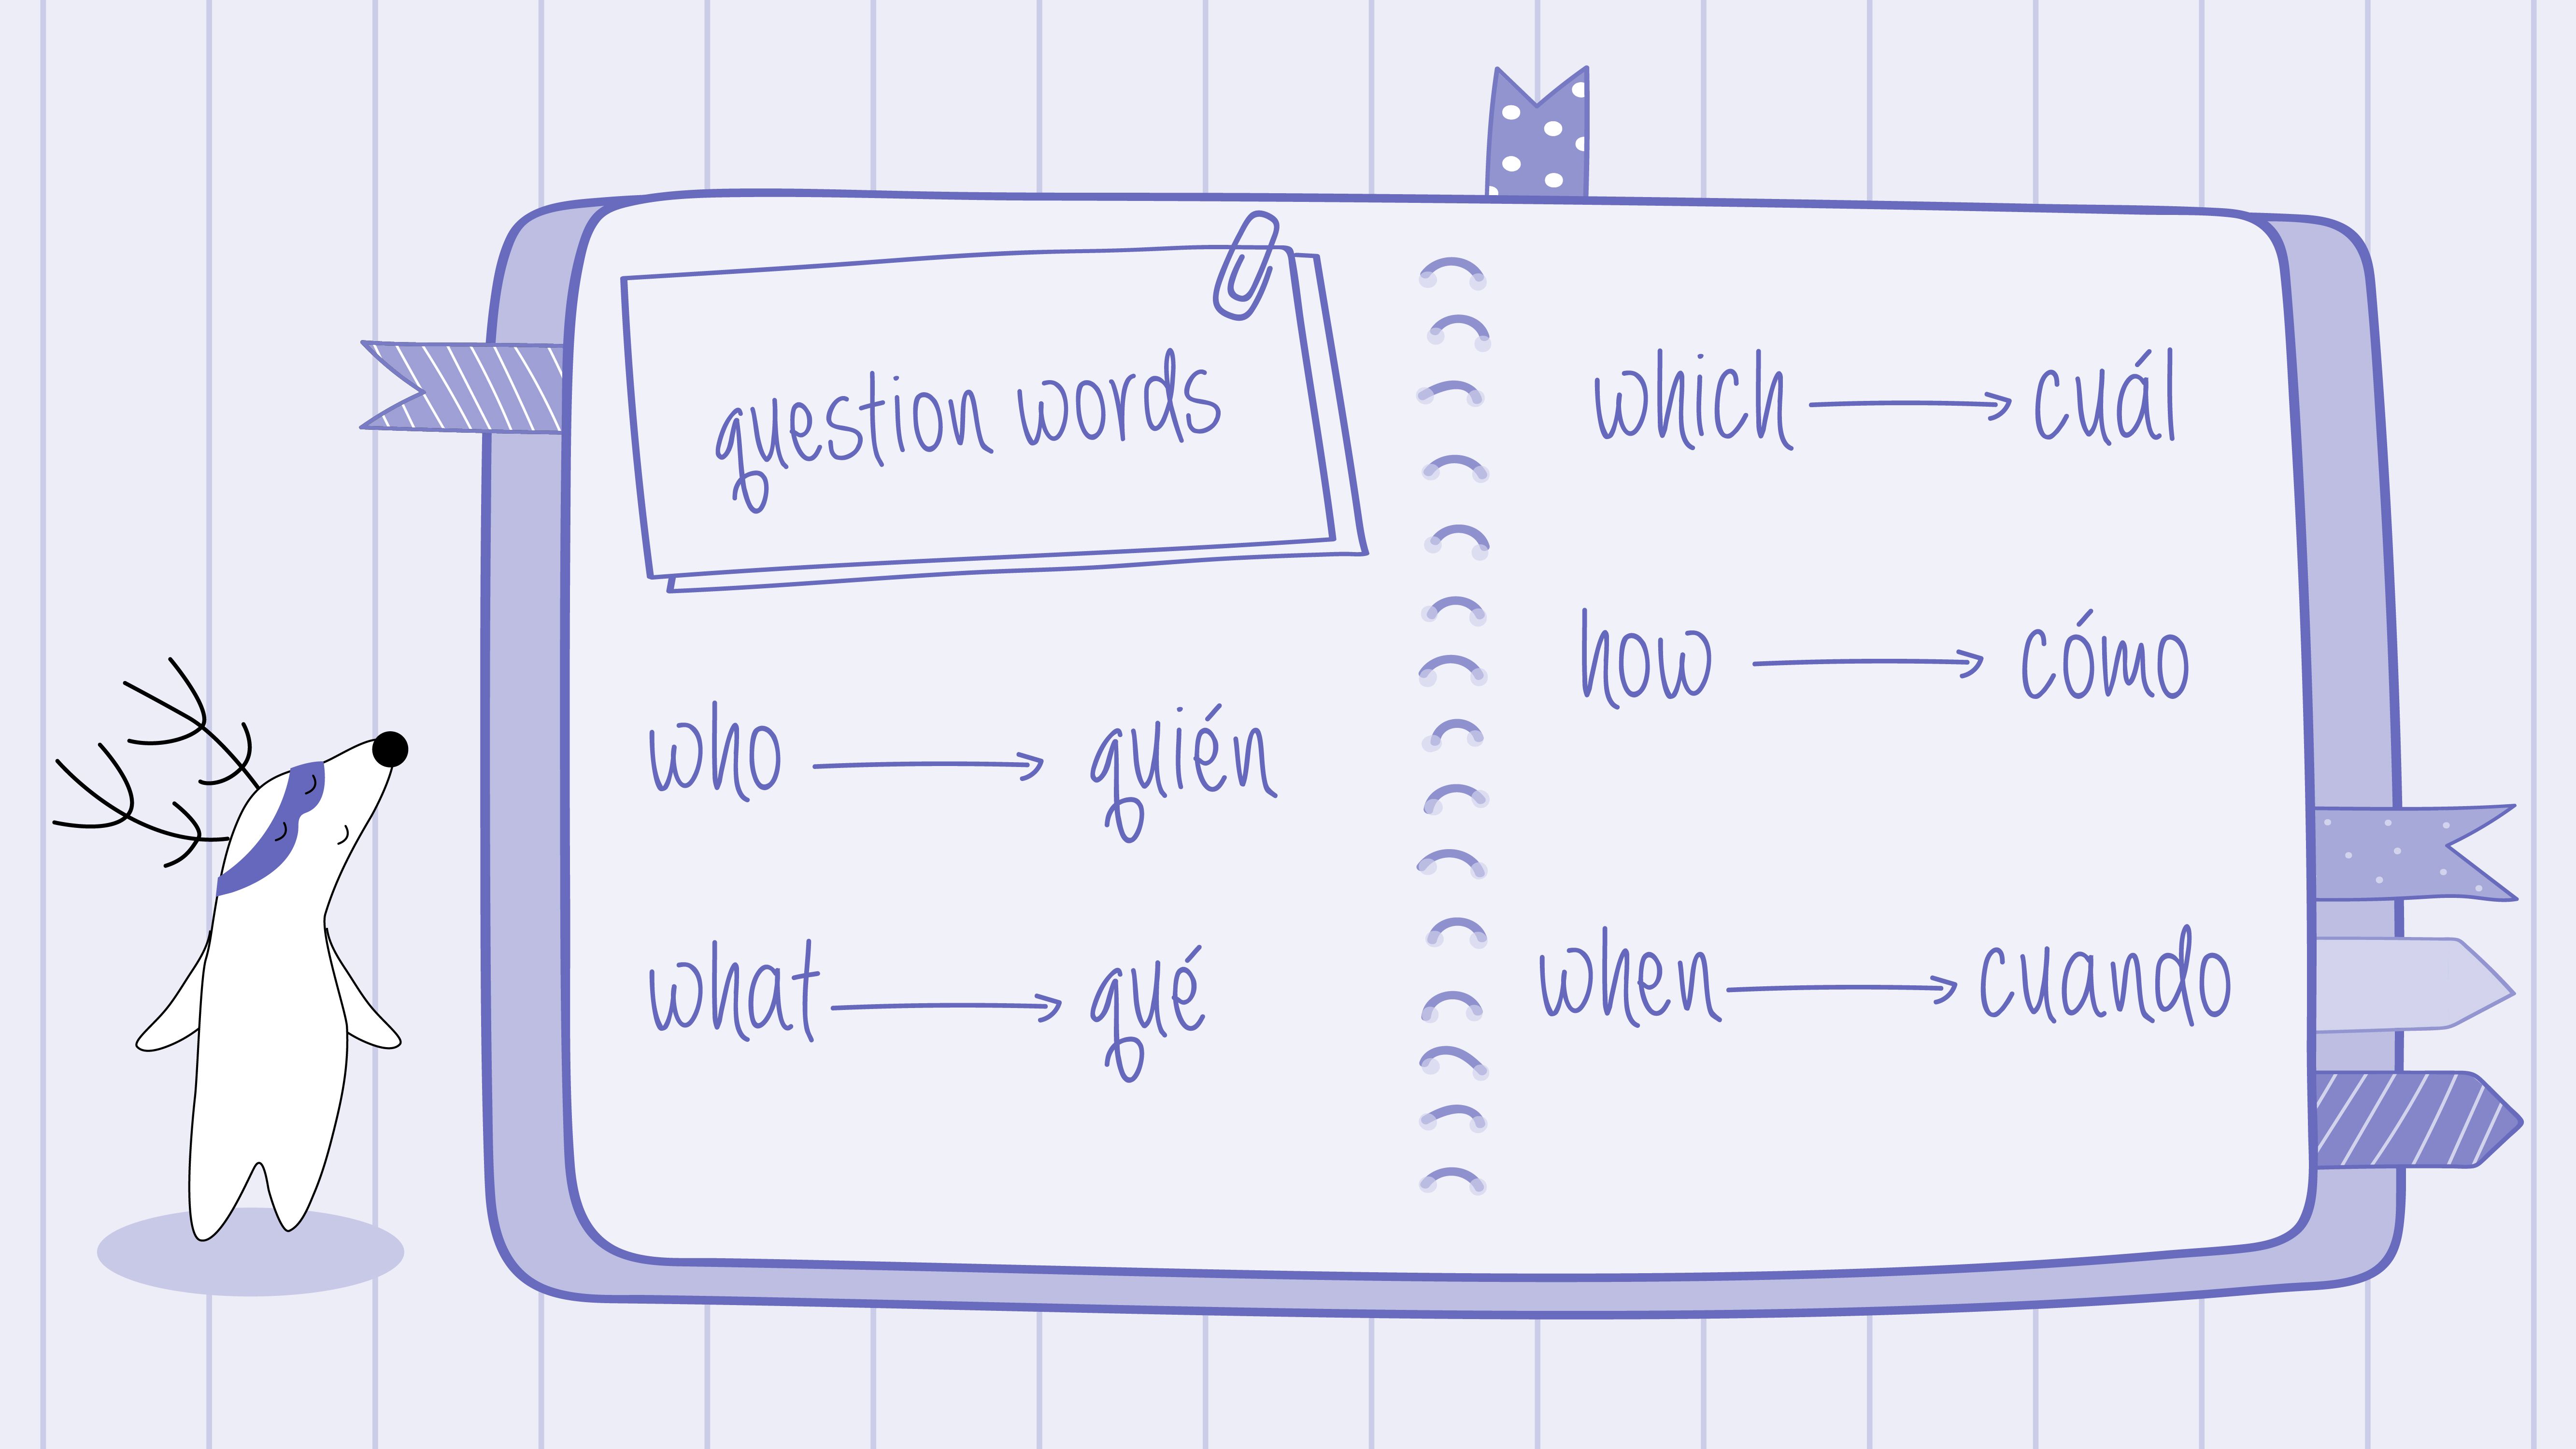 Another picture of the notebook featuring Spanish question words and their respective English translations: “who -> quién,” “what -> qué,” “which -> cuál,” “how-> cómo,” and “when-> cuando.”